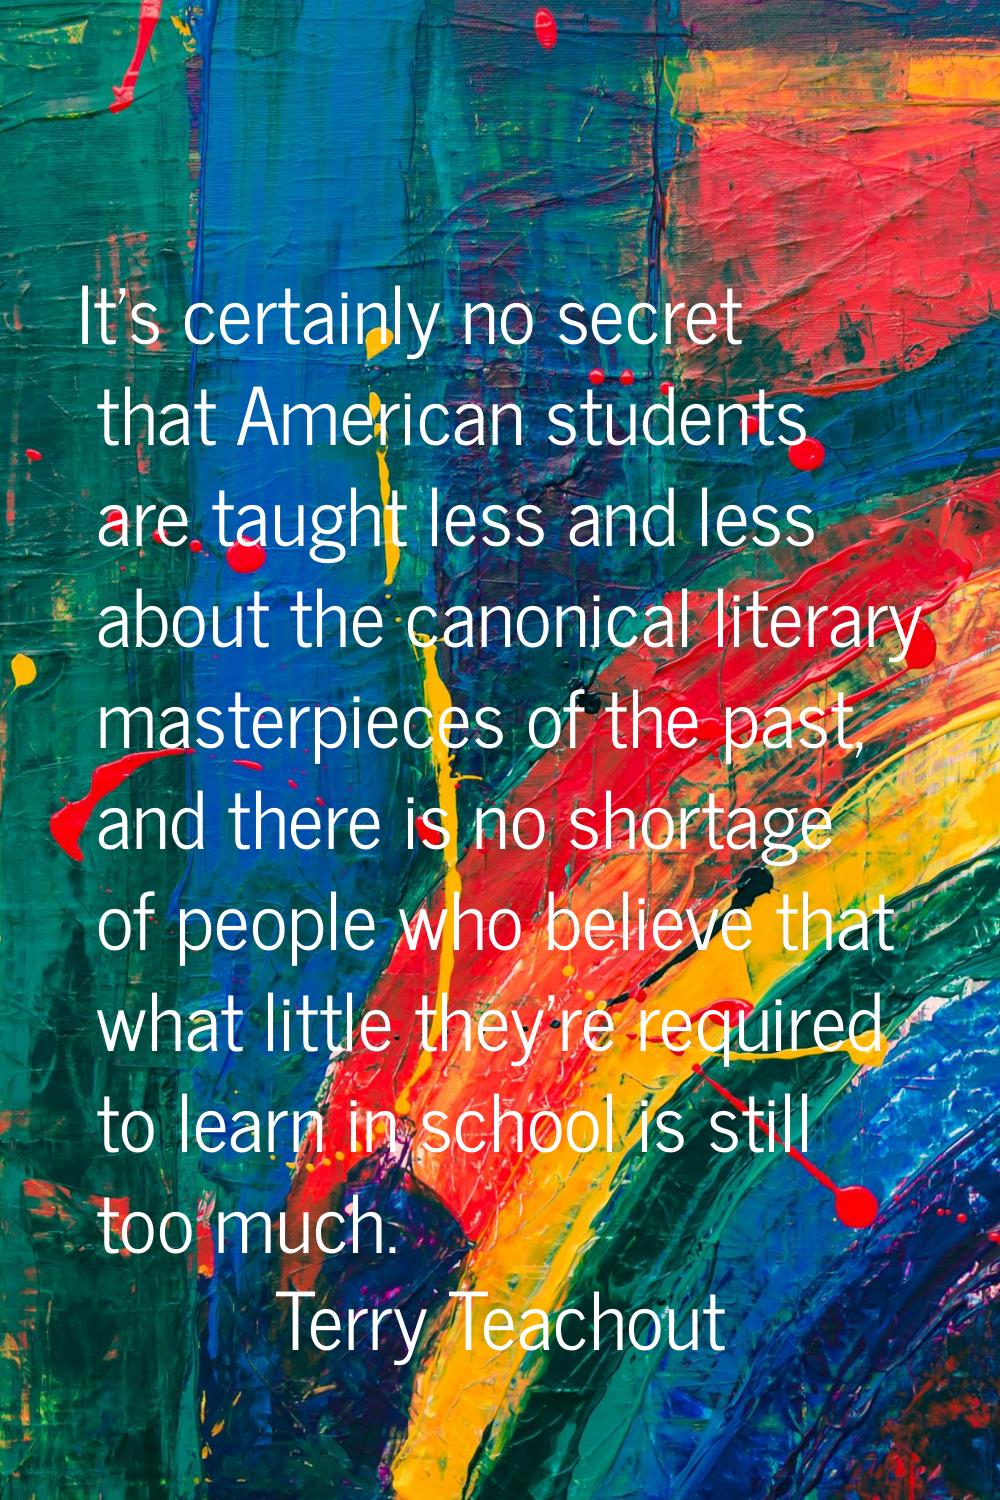 It's certainly no secret that American students are taught less and less about the canonical litera